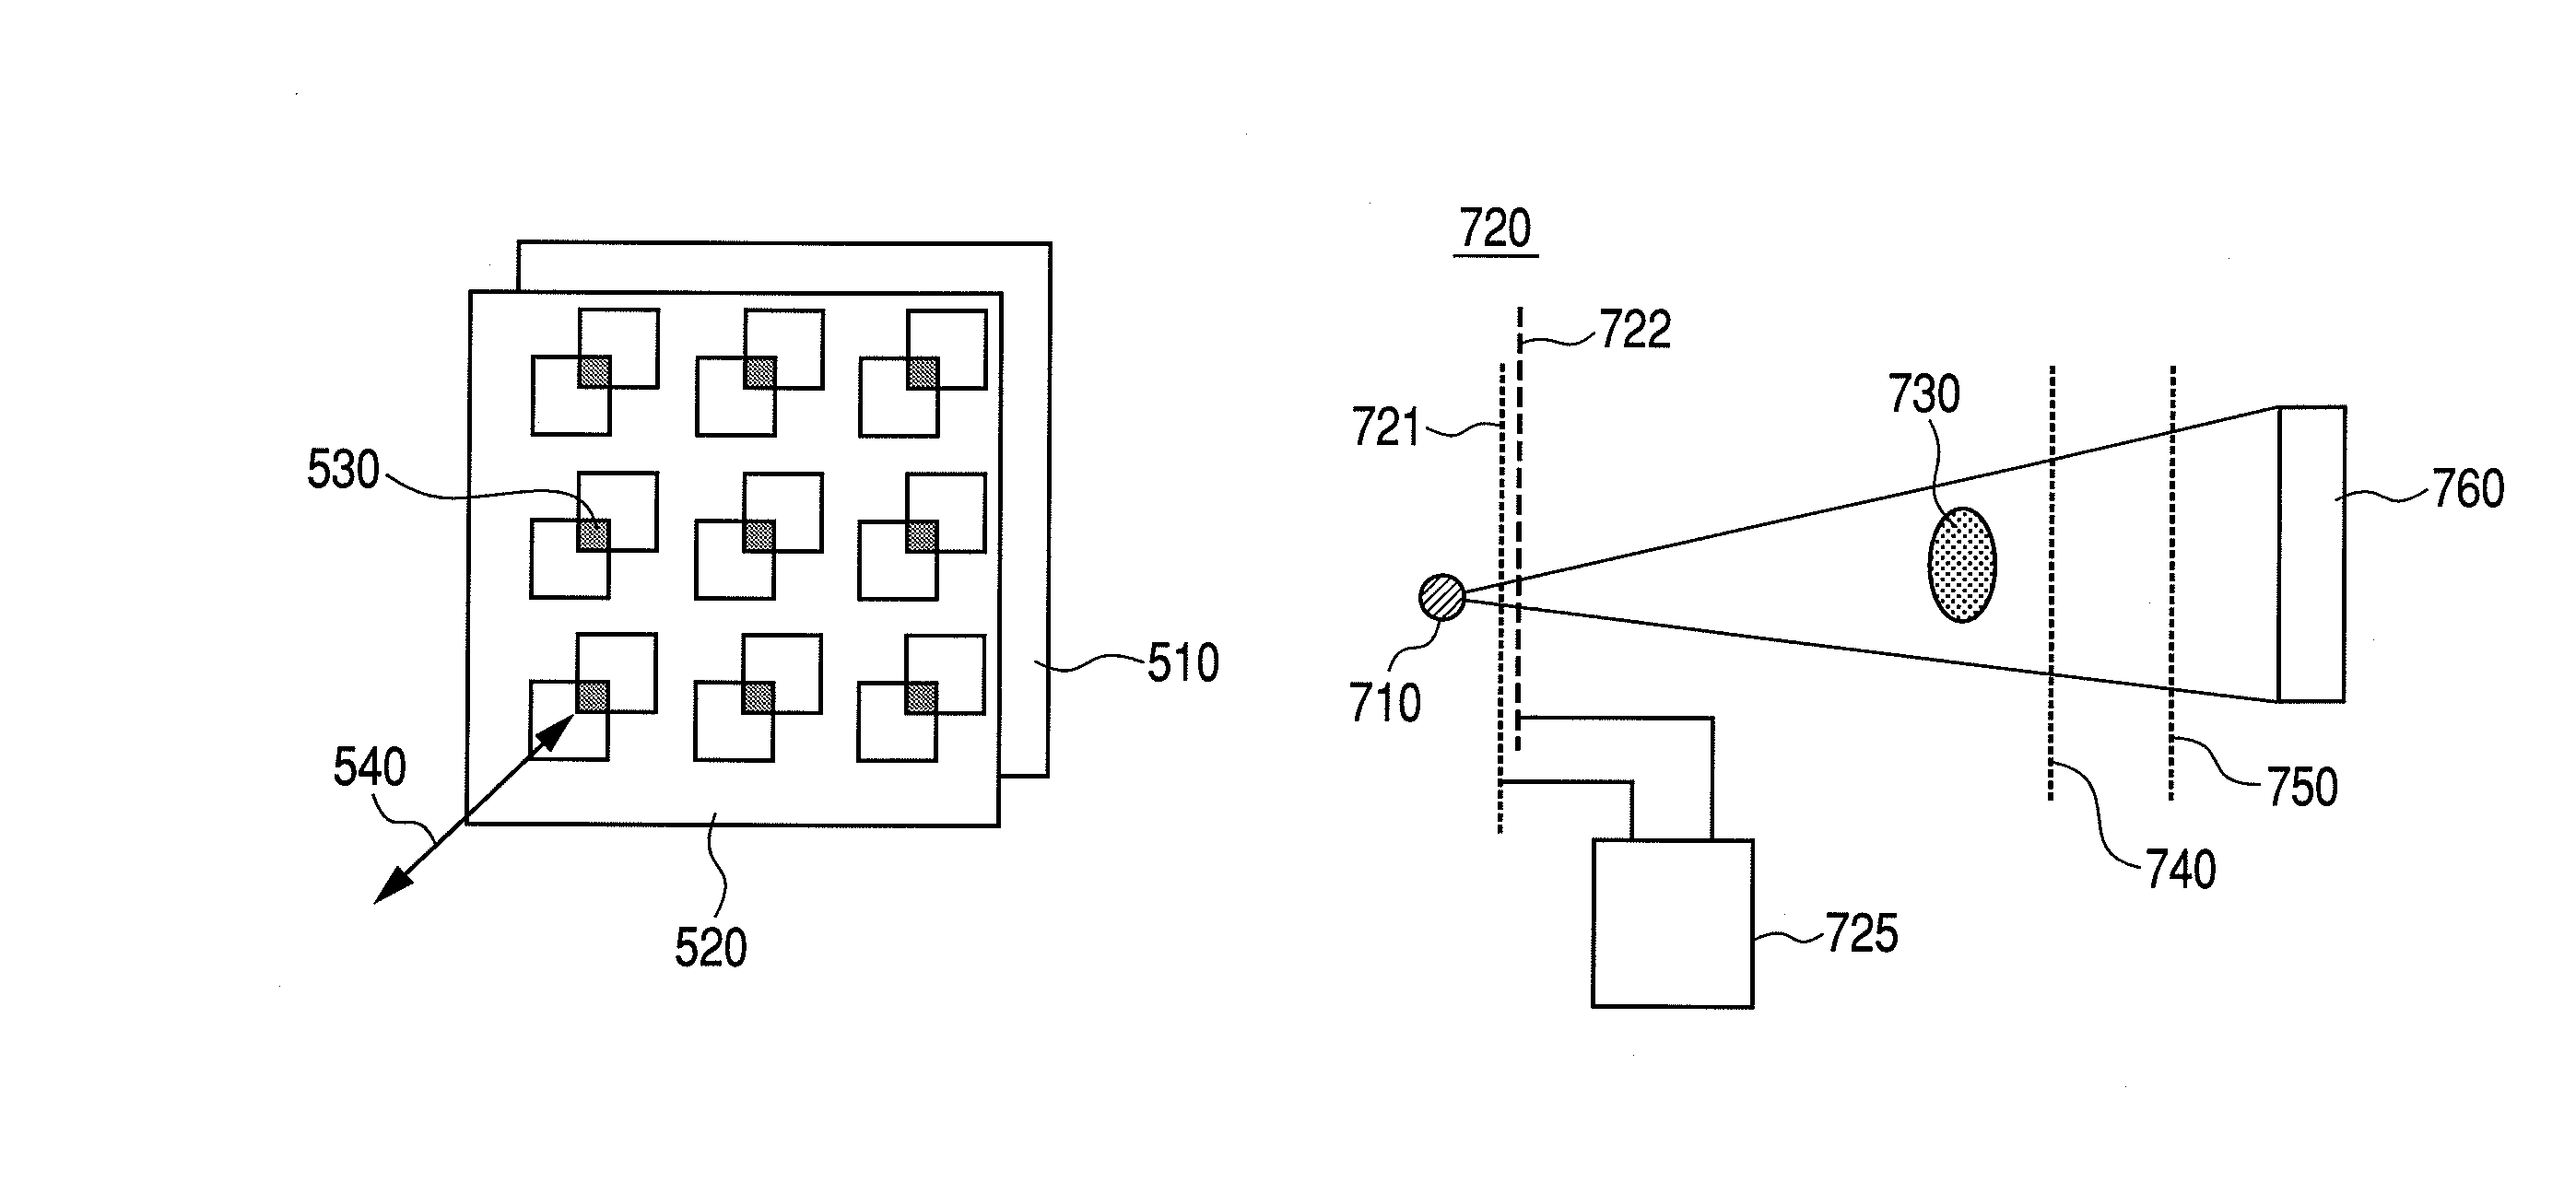 Source grating for X-rays, imaging apparatus for X-ray phase contrast image and X-ray computed tomography system